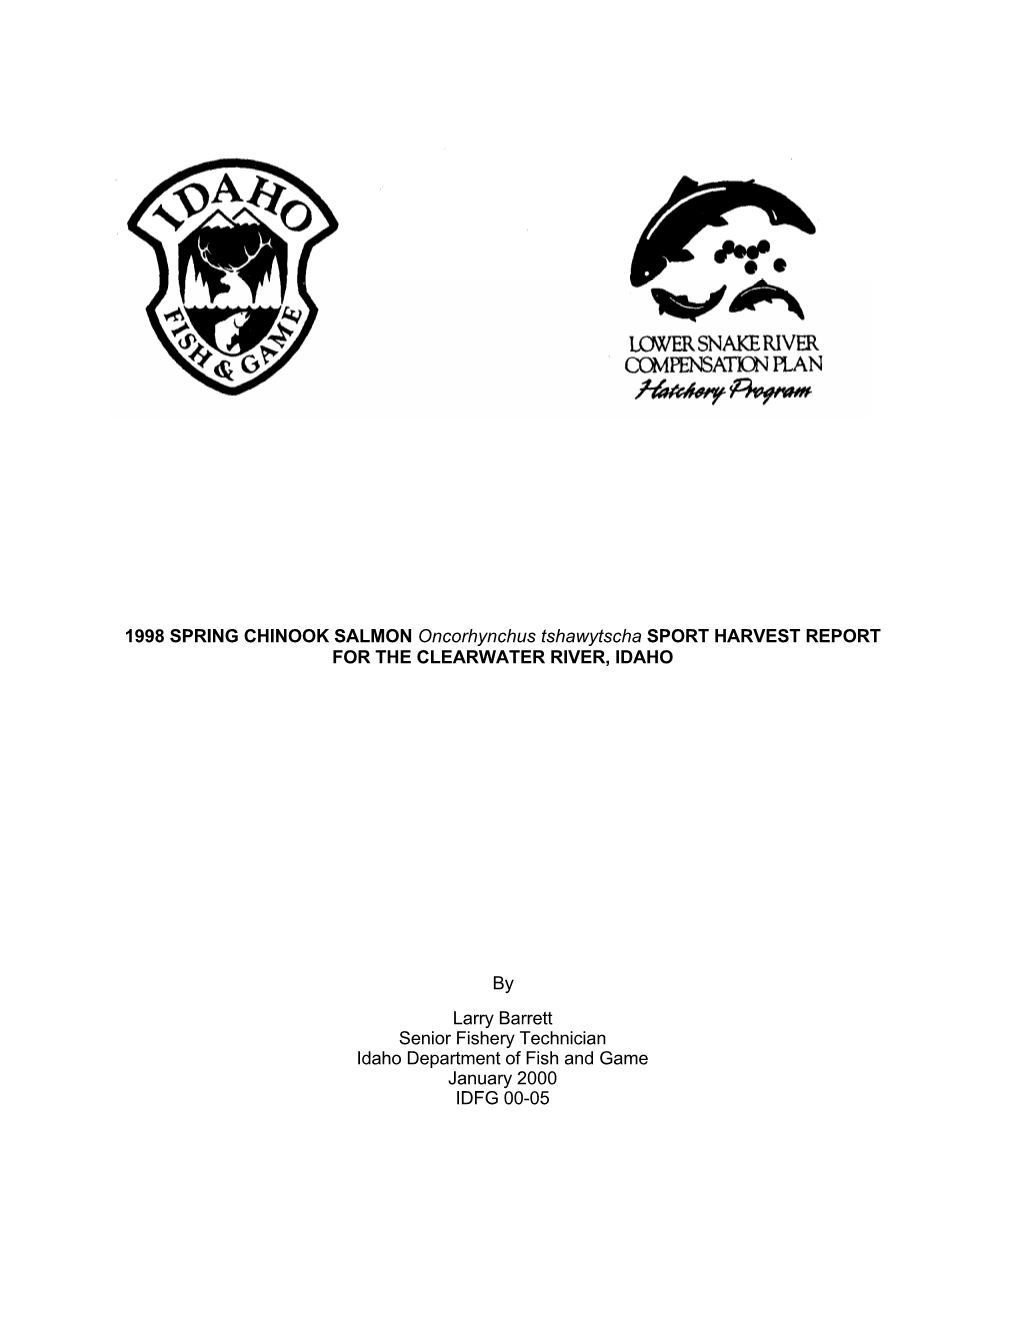 1998 SPRING CHINOOK SALMON Oncorhynchus Tshawytscha SPORT HARVEST REPORT for the CLEARWATER RIVER, IDAHO